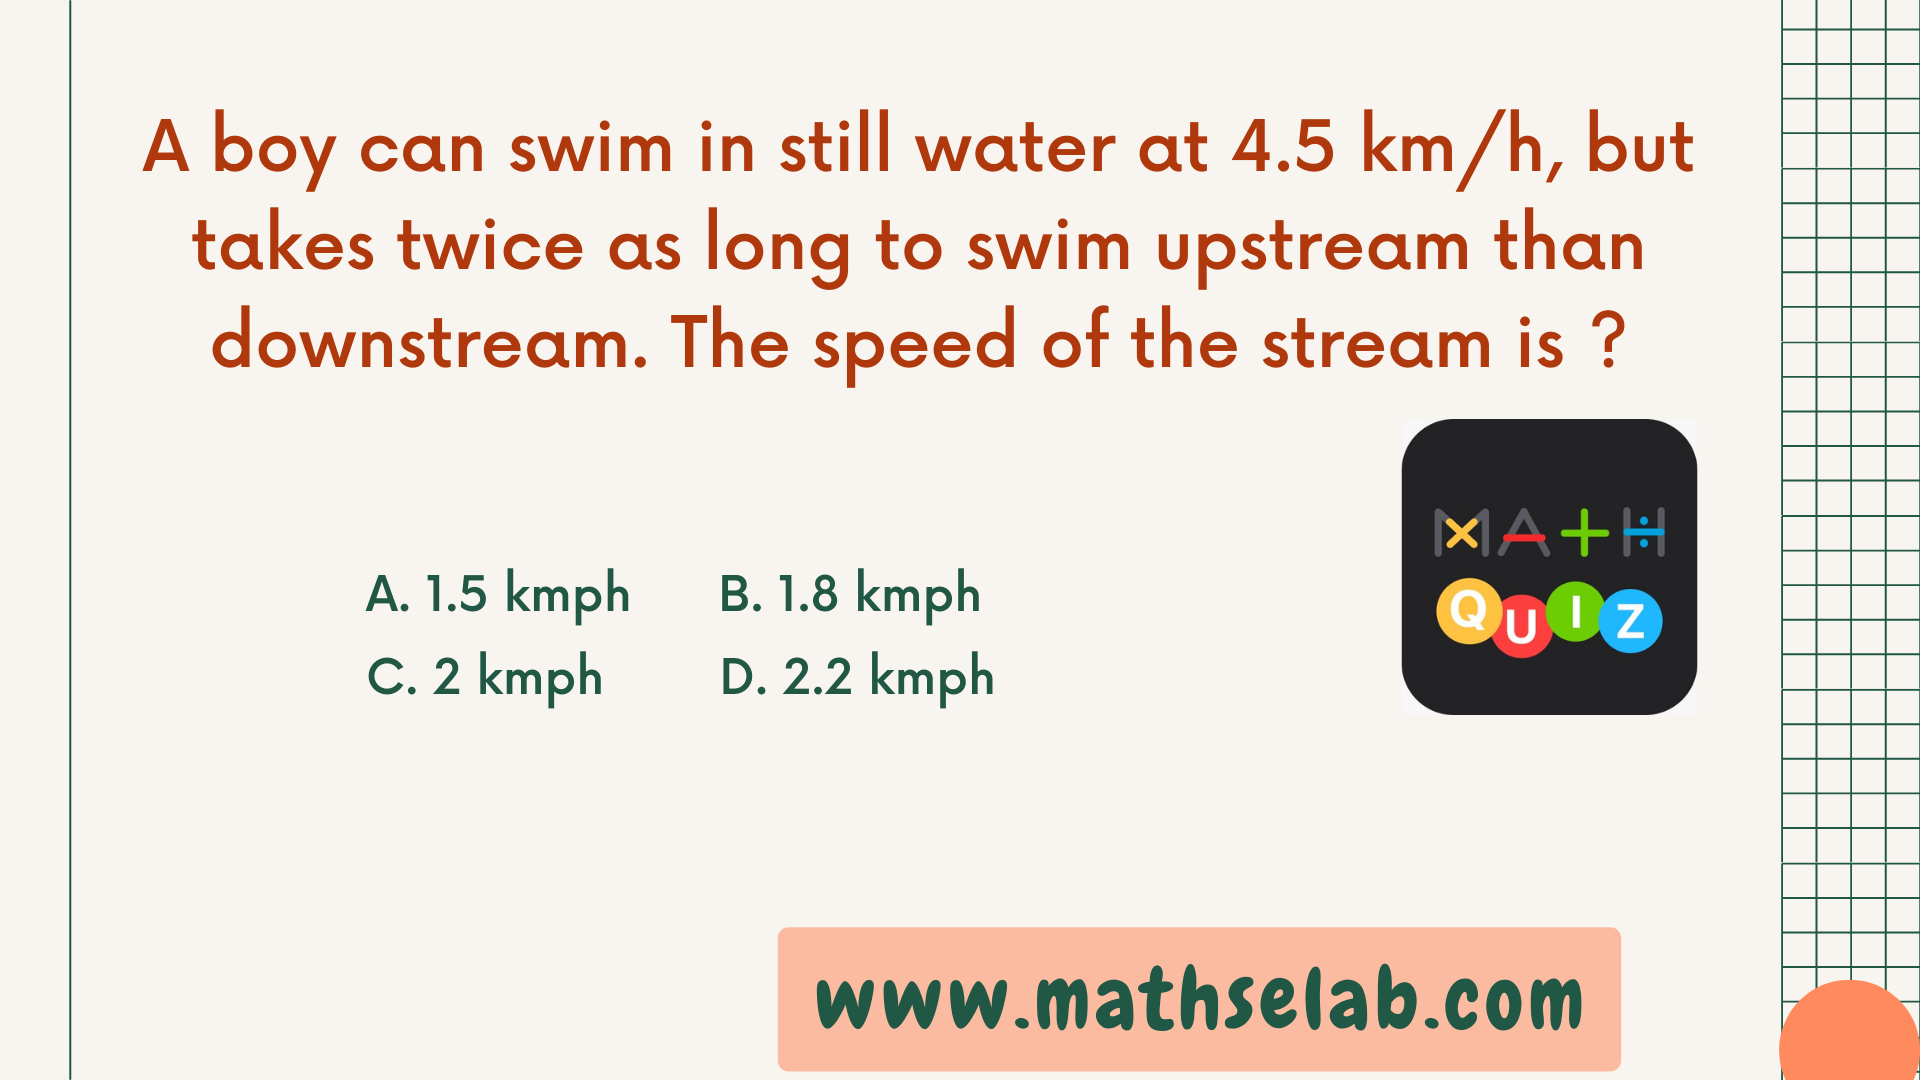 A boy can swim in still water at 4.5 kmh, but takes twice as long to swim upstream than downstream. The speed of the stream is - www.mathselab.com